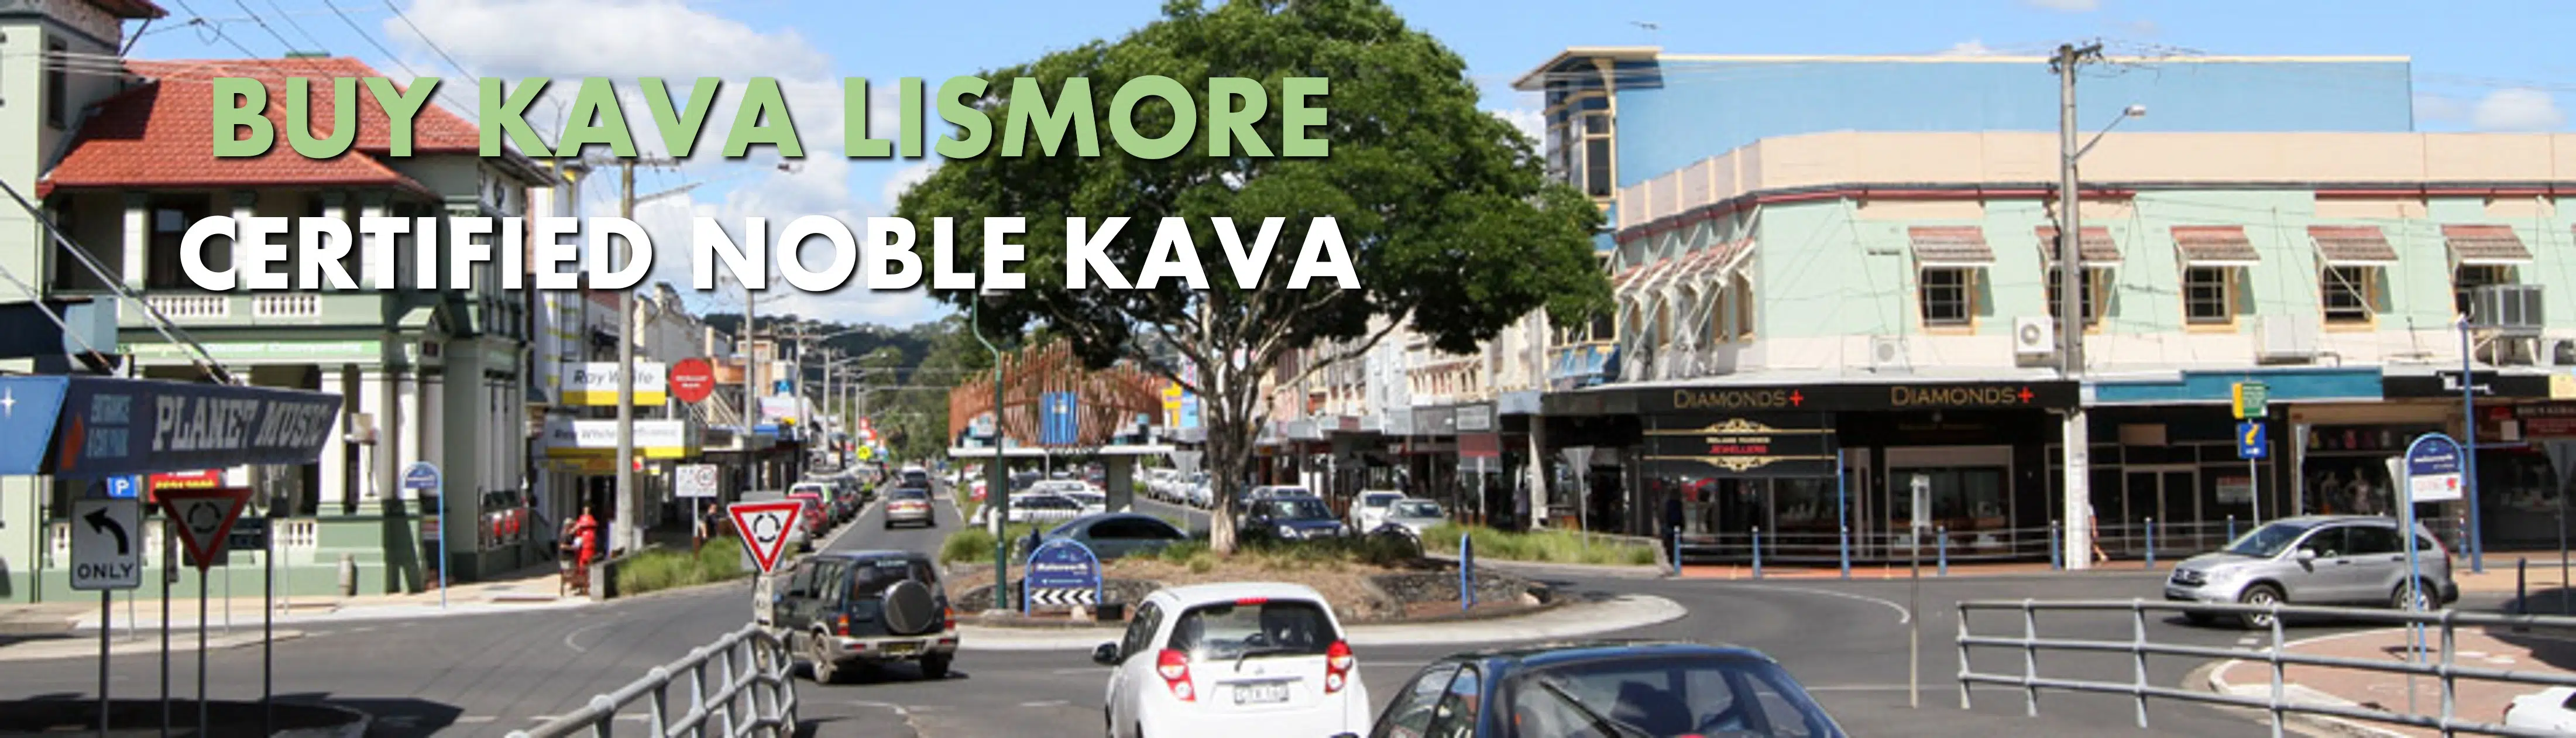 Street scene in Lismore New South Wales with caption Buy Kava Lismore Certified Noble Kava